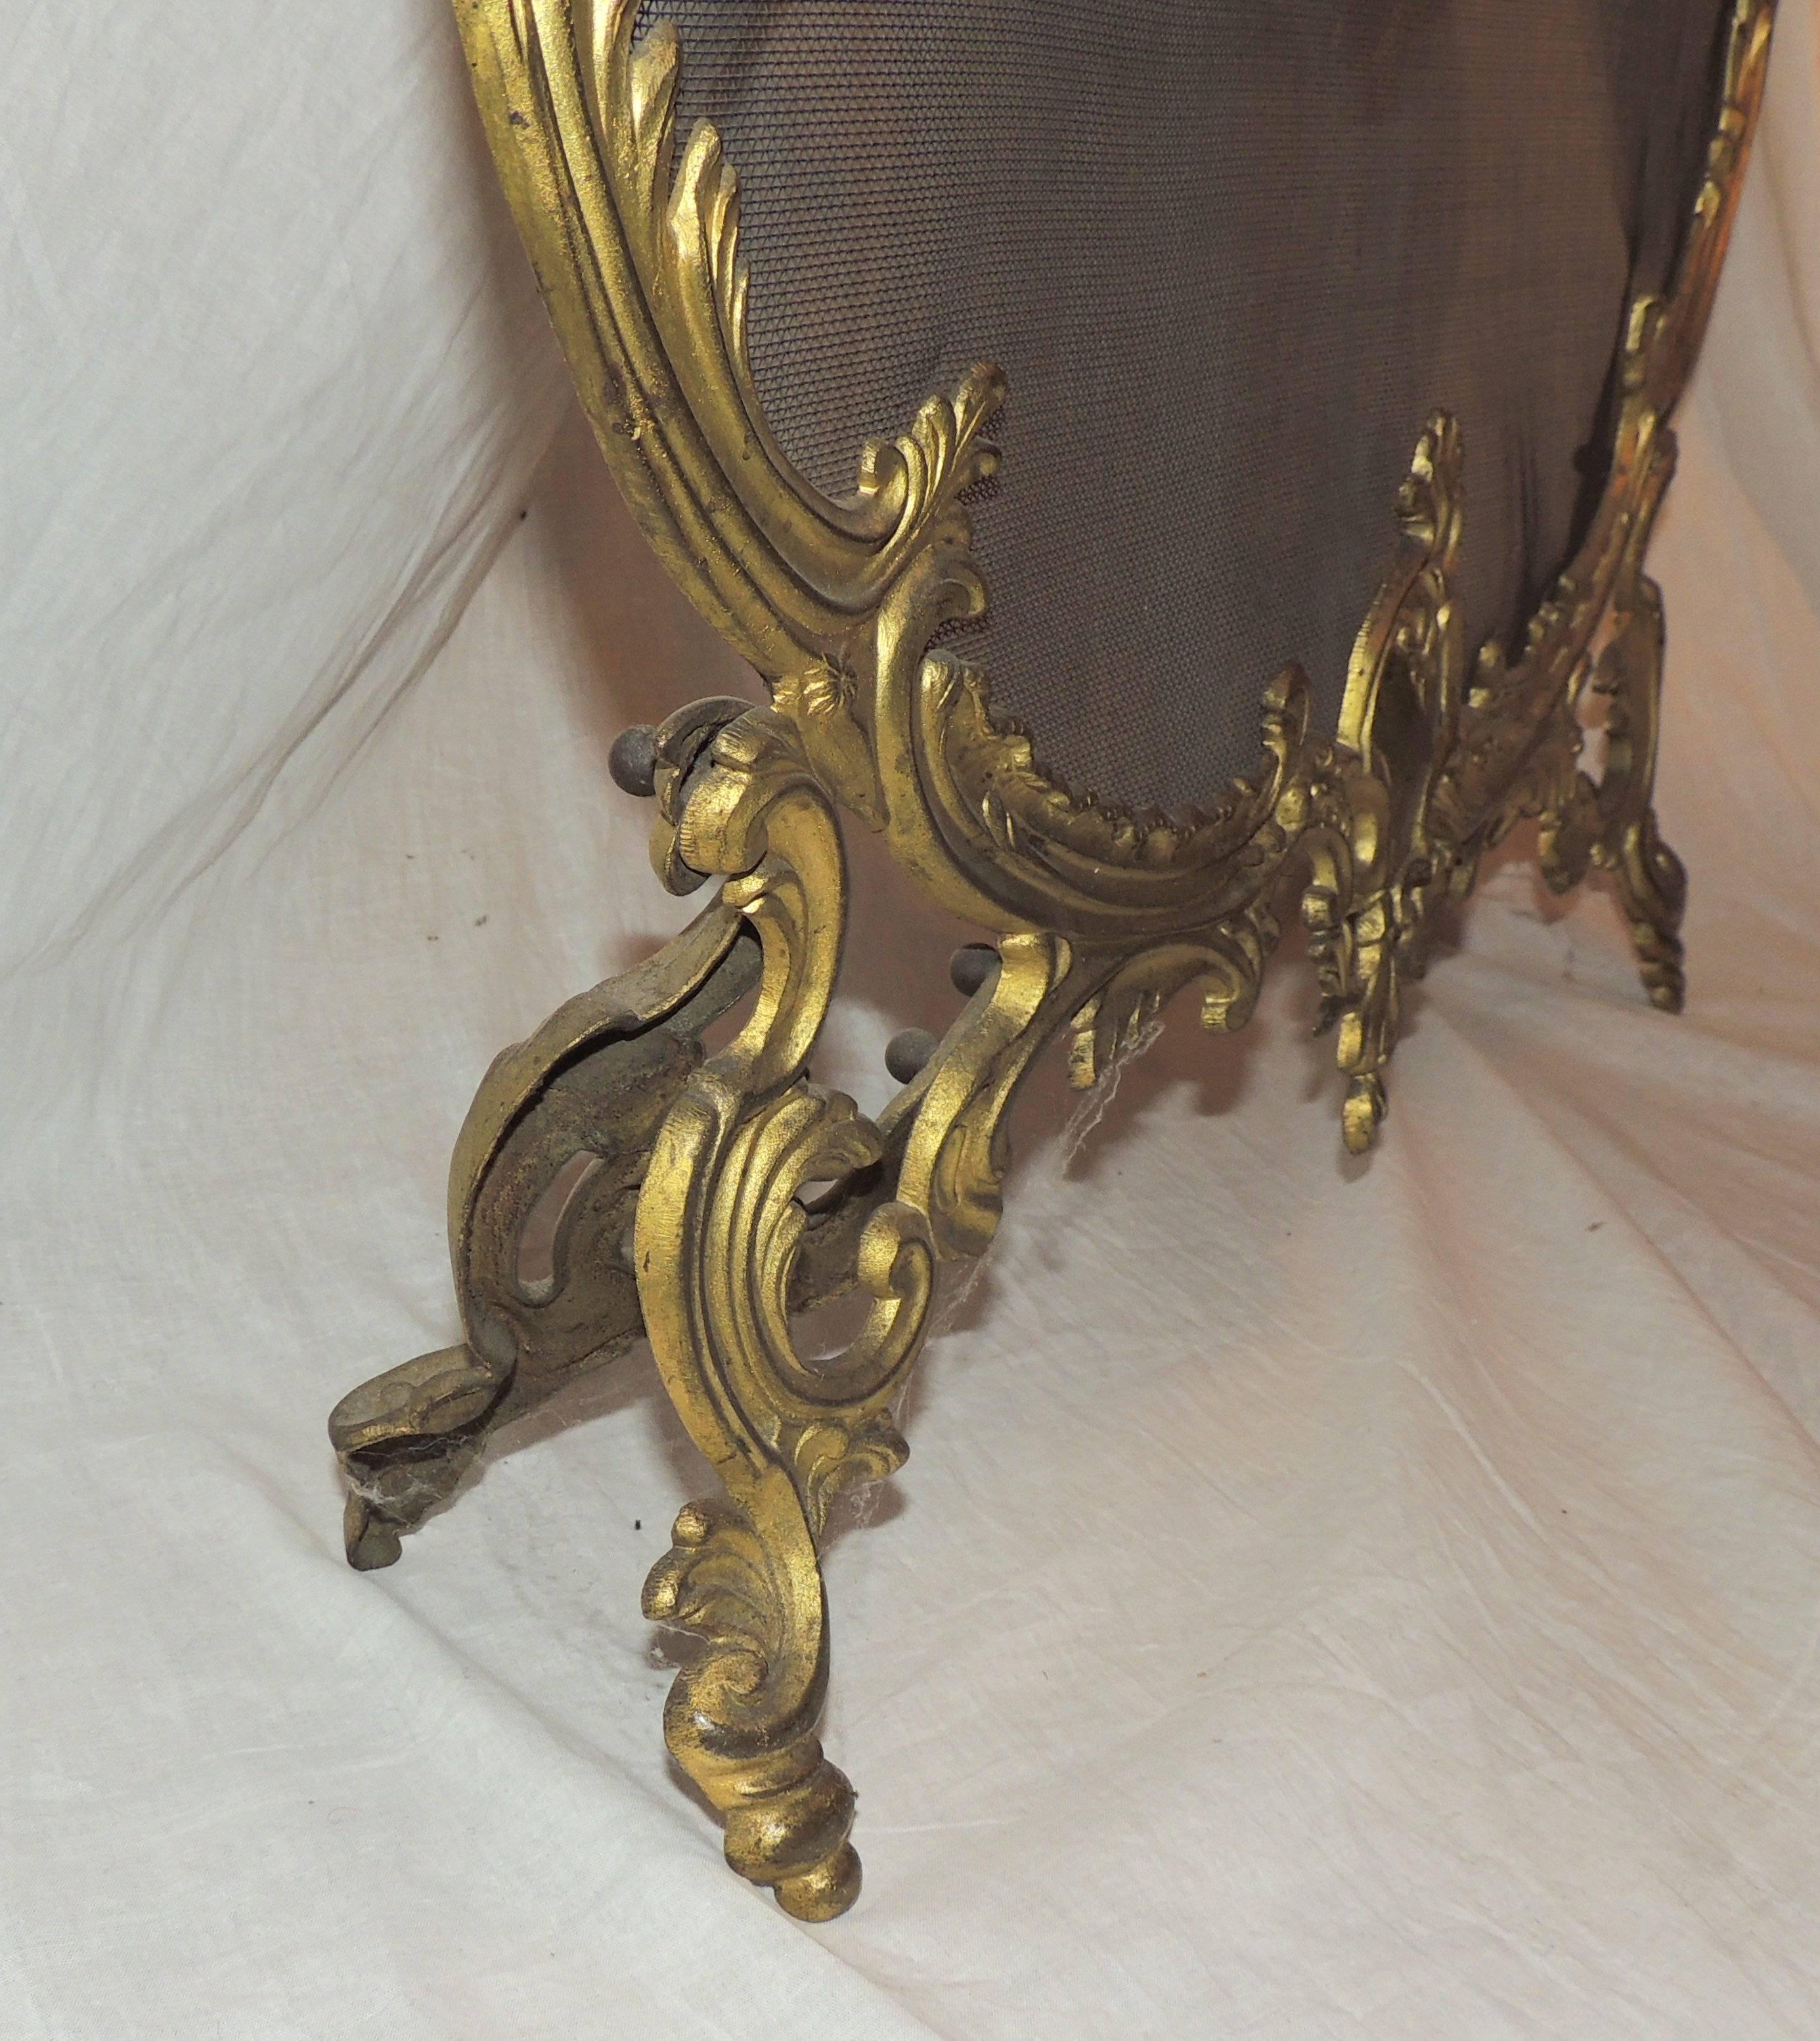 Wonderful French Gilt Doré Bronze Fire Place Screen Trion of Cherubs Firescreen In Good Condition For Sale In Roslyn, NY